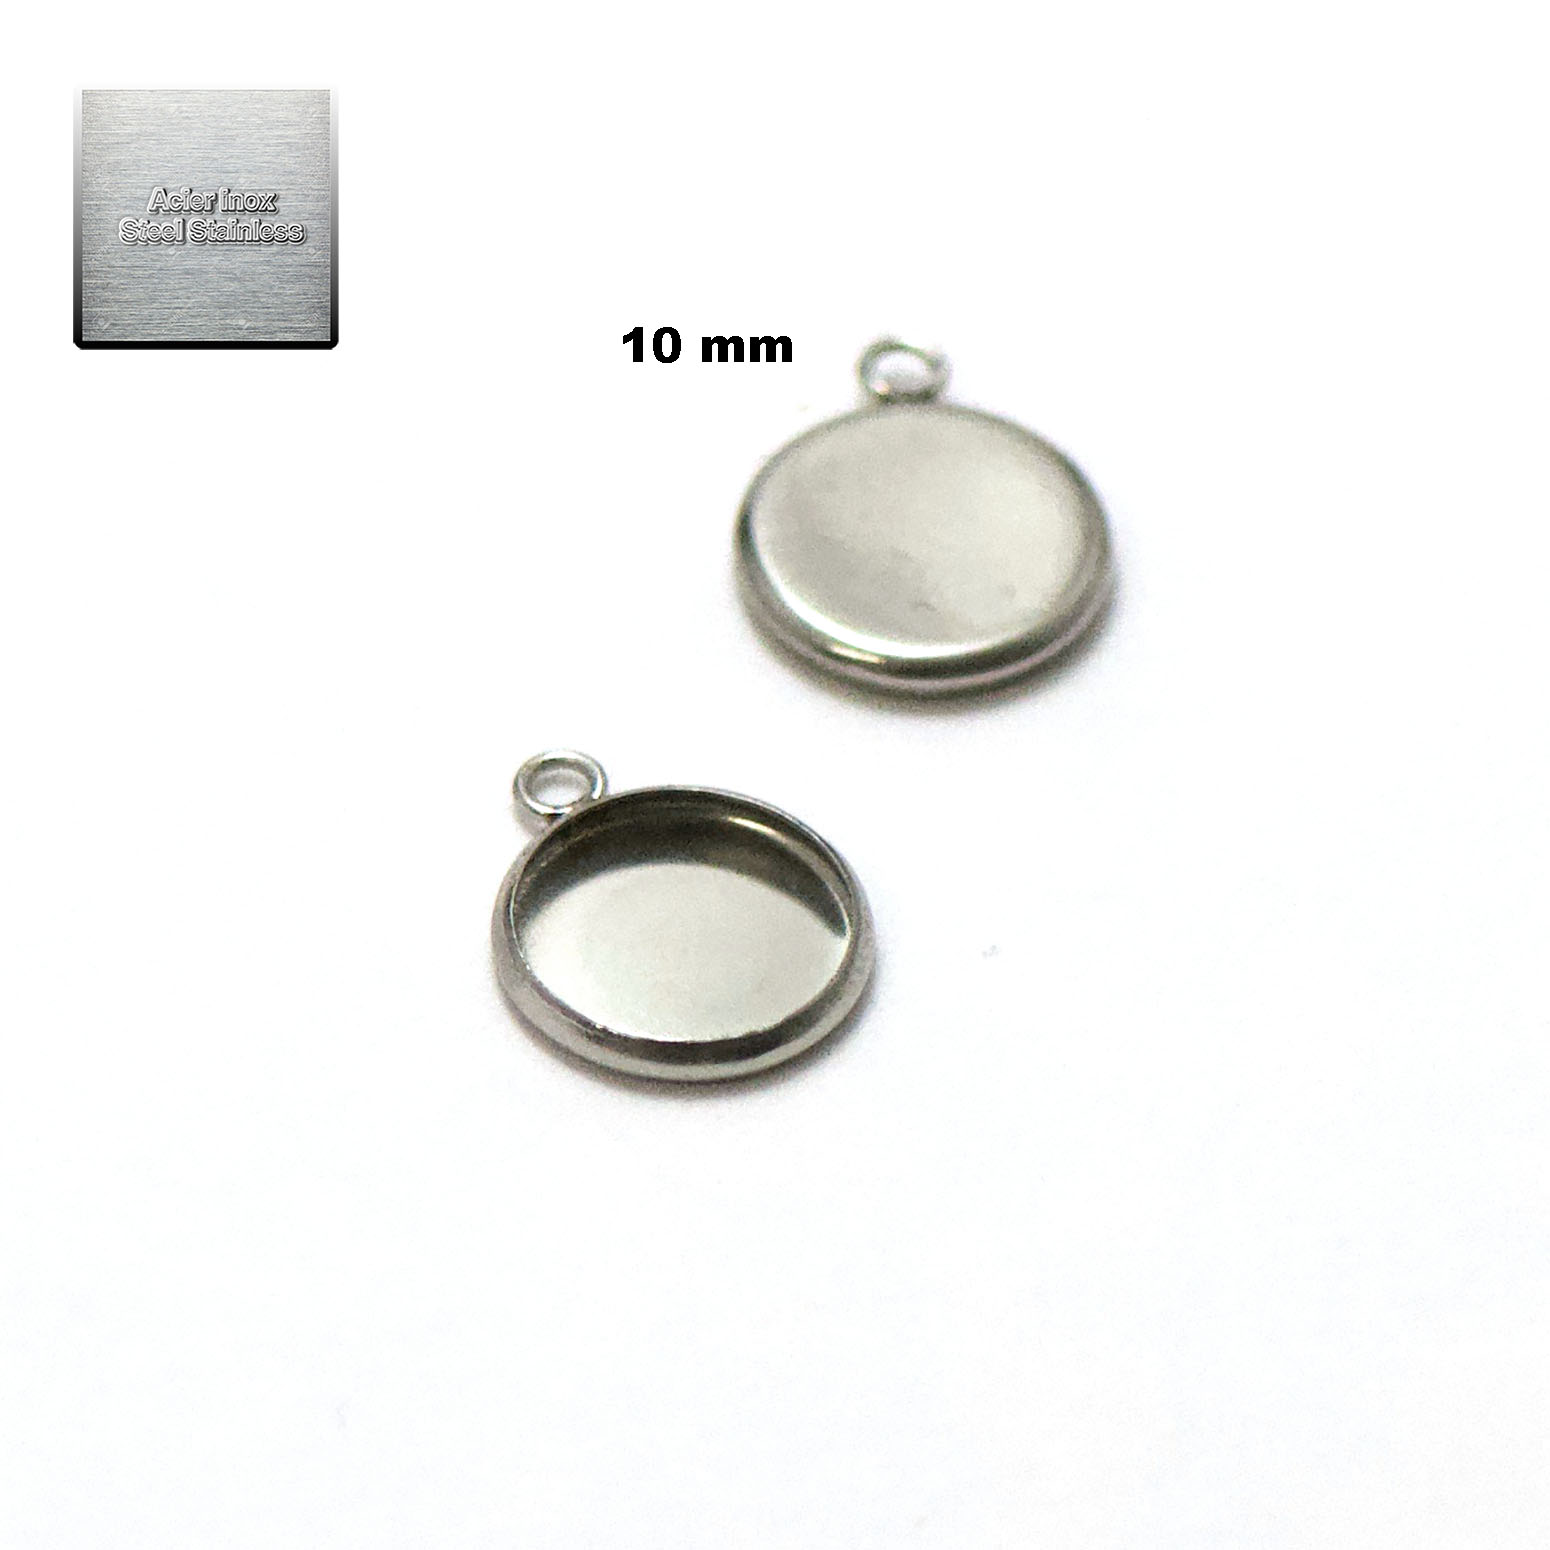 Acier inox: 10 pendentif support cabochon 10 mm, steel stainless